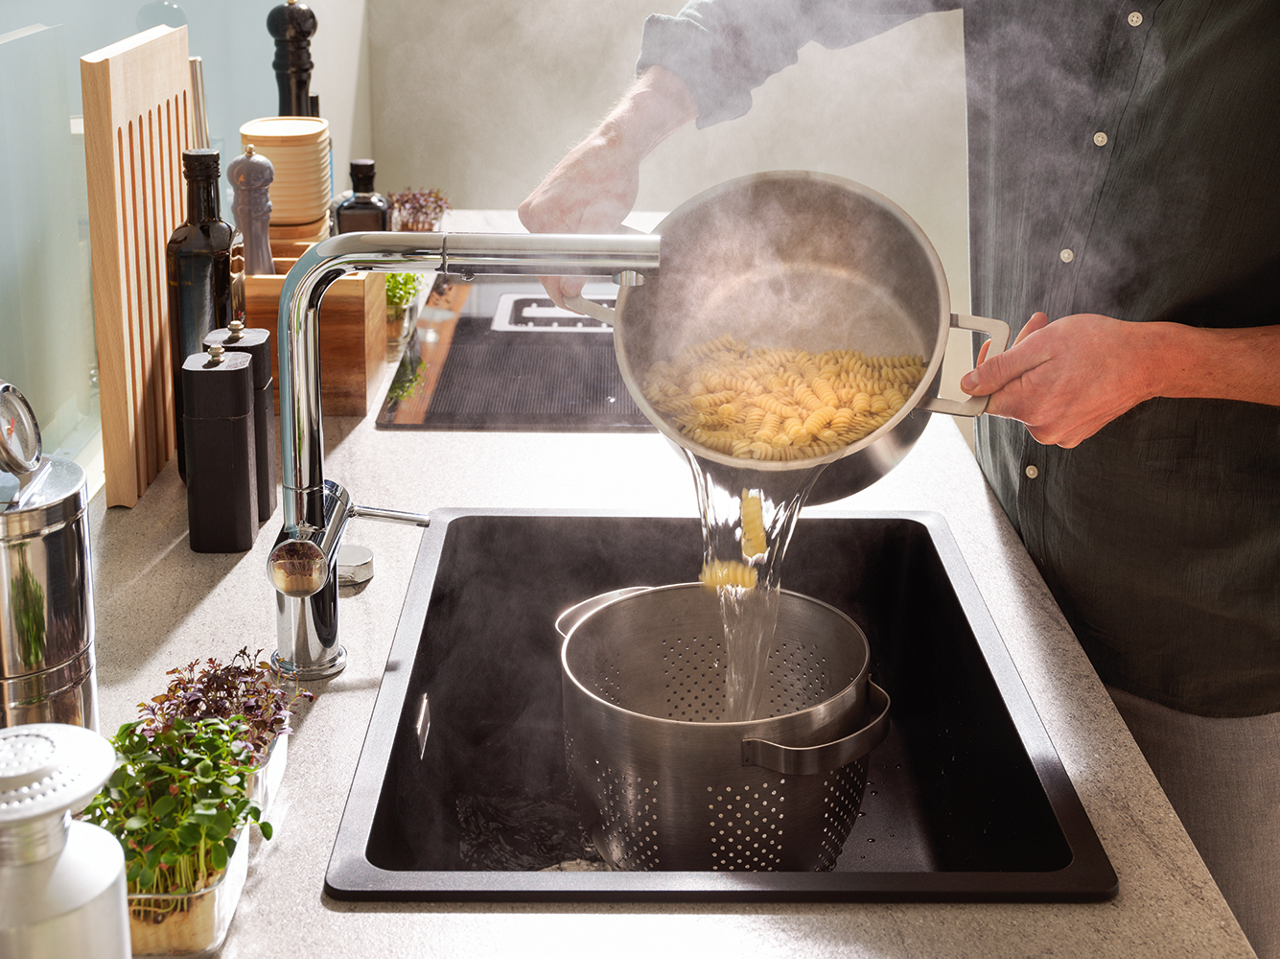 Pasta being poured in pot inside a Maris Bowl sink